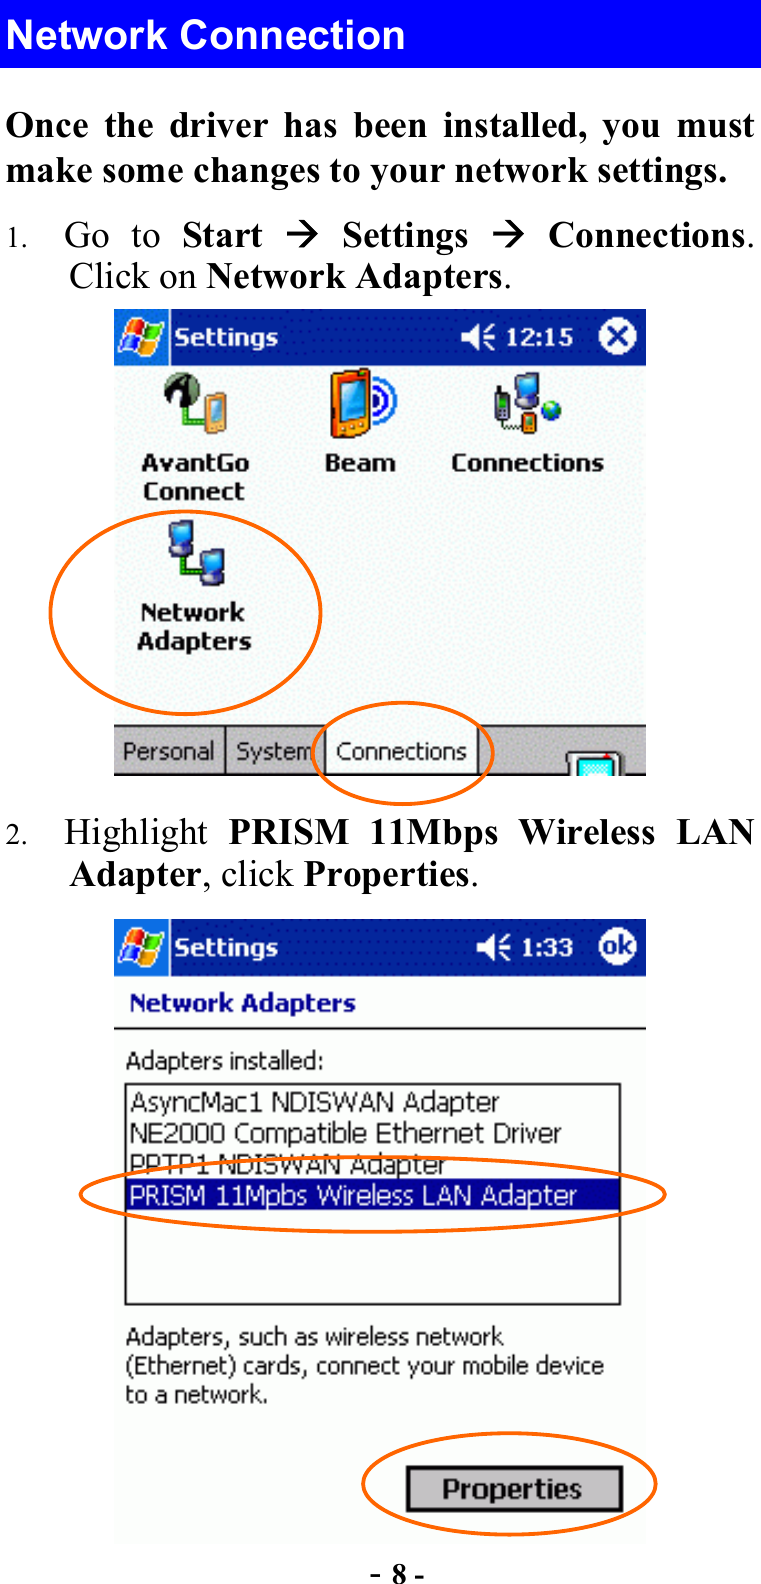  - 8 - Network Connection Once the driver has been installed, you must make some changes to your network settings. 1.  Go to Start   Settings  Connections. Click on Network Adapters.  2.  Highlight  PRISM 11Mbps Wireless LAN Adapter, click Properties.  